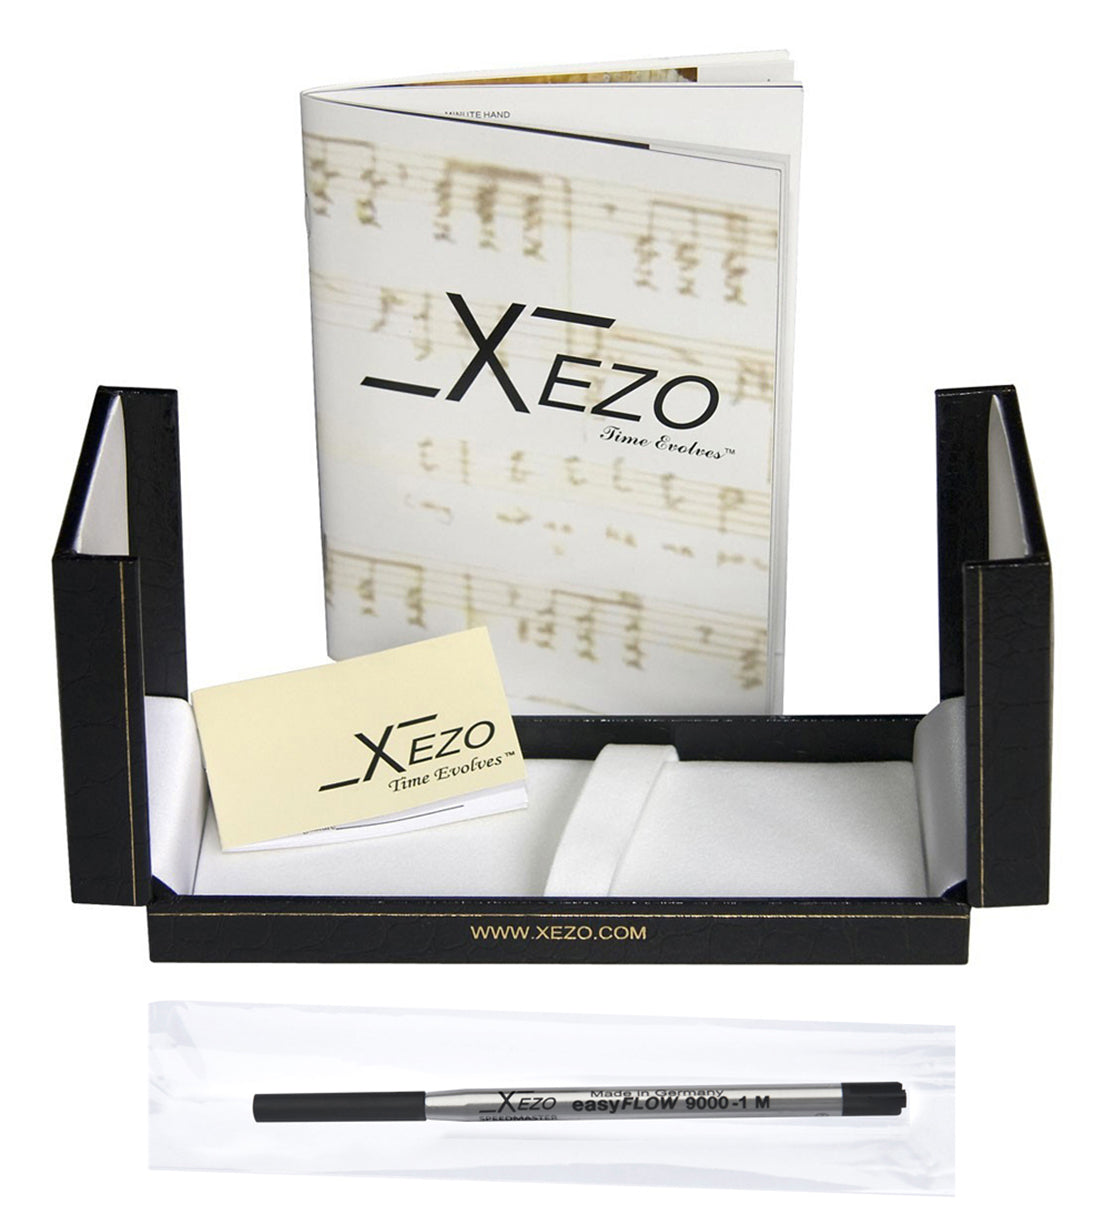 Xezo - Black gift box, certificate, manual, and ink cartridge of the Incognito Burgundy B ballpoint pen